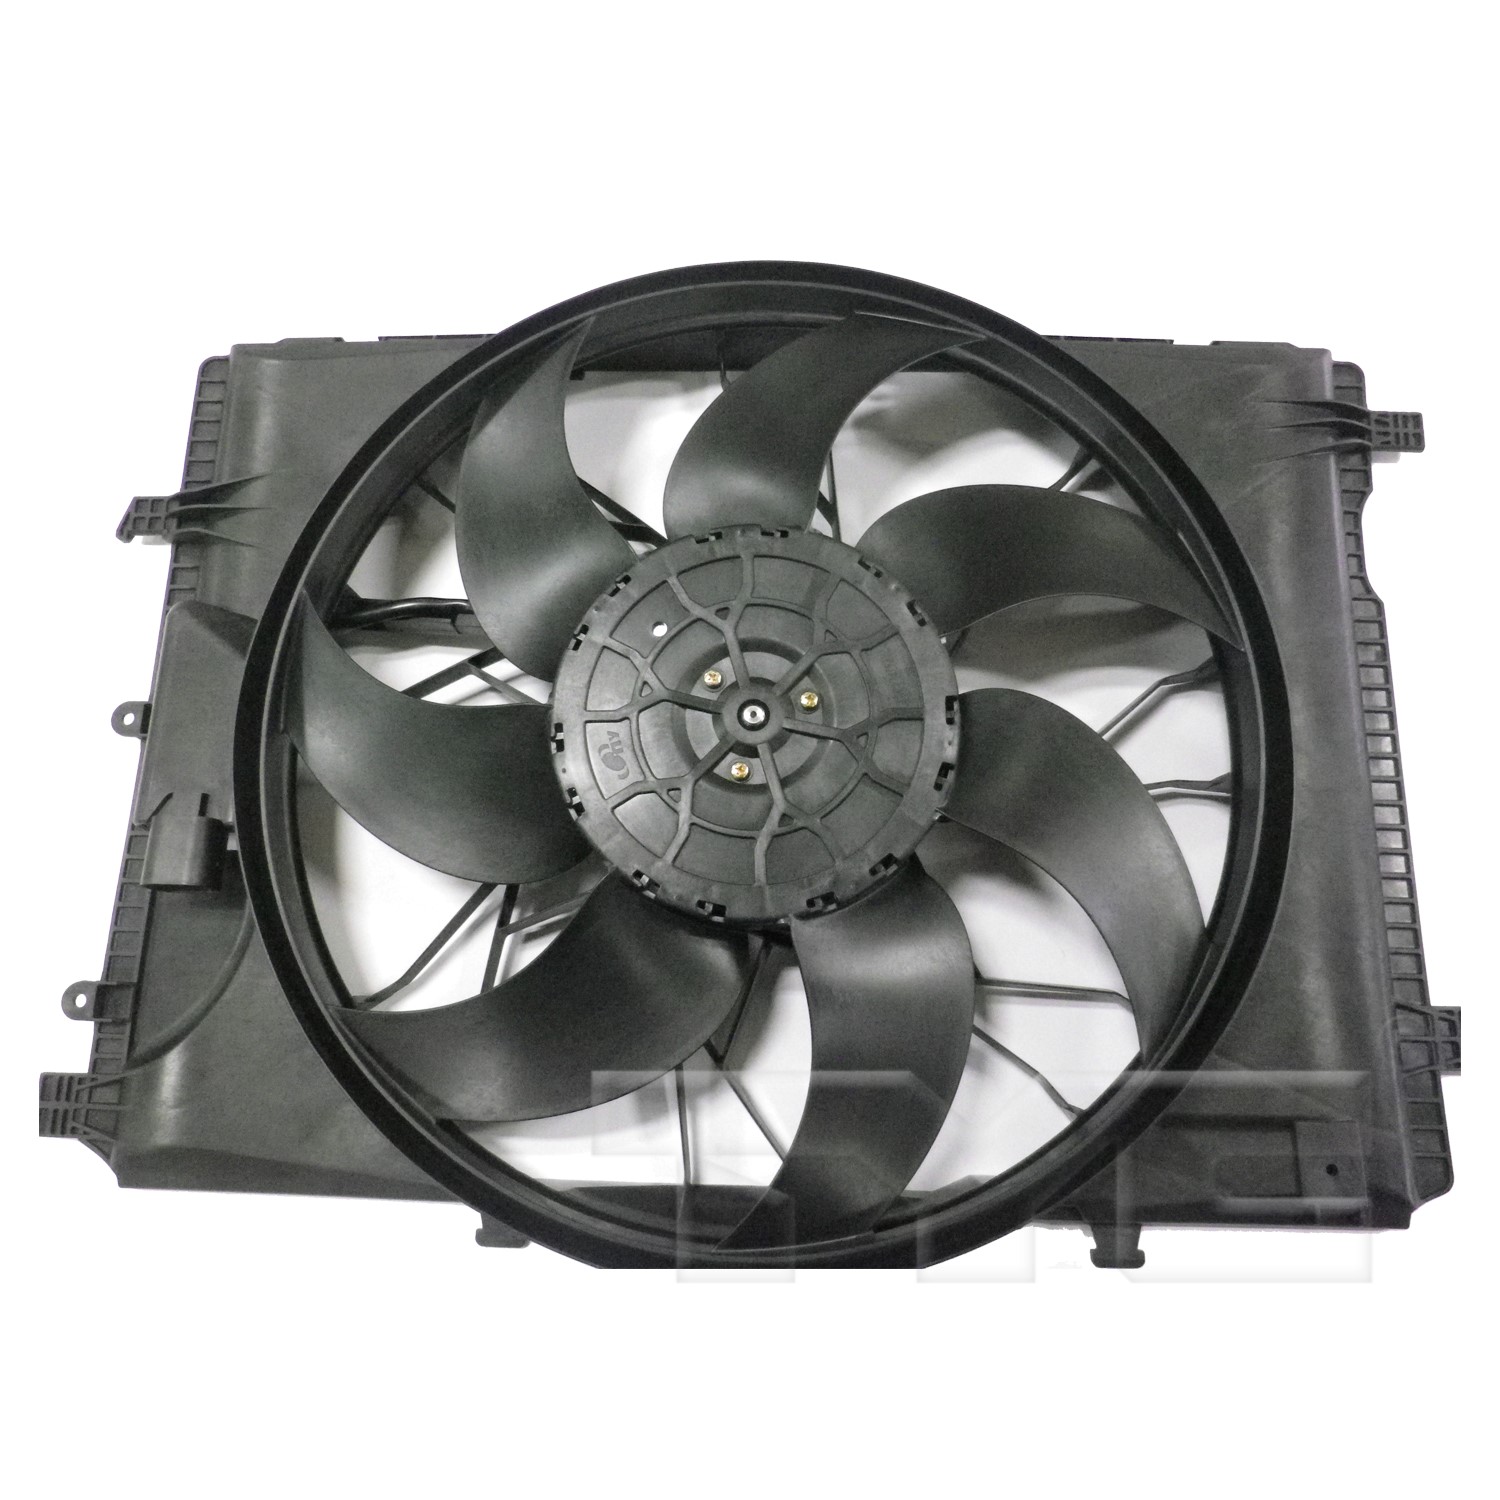 Aftermarket FAN ASSEMBLY/FAN SHROUDS for MERCEDES-BENZ - C63 AMG, C63 AMG,08-14,Radiator cooling fan assy